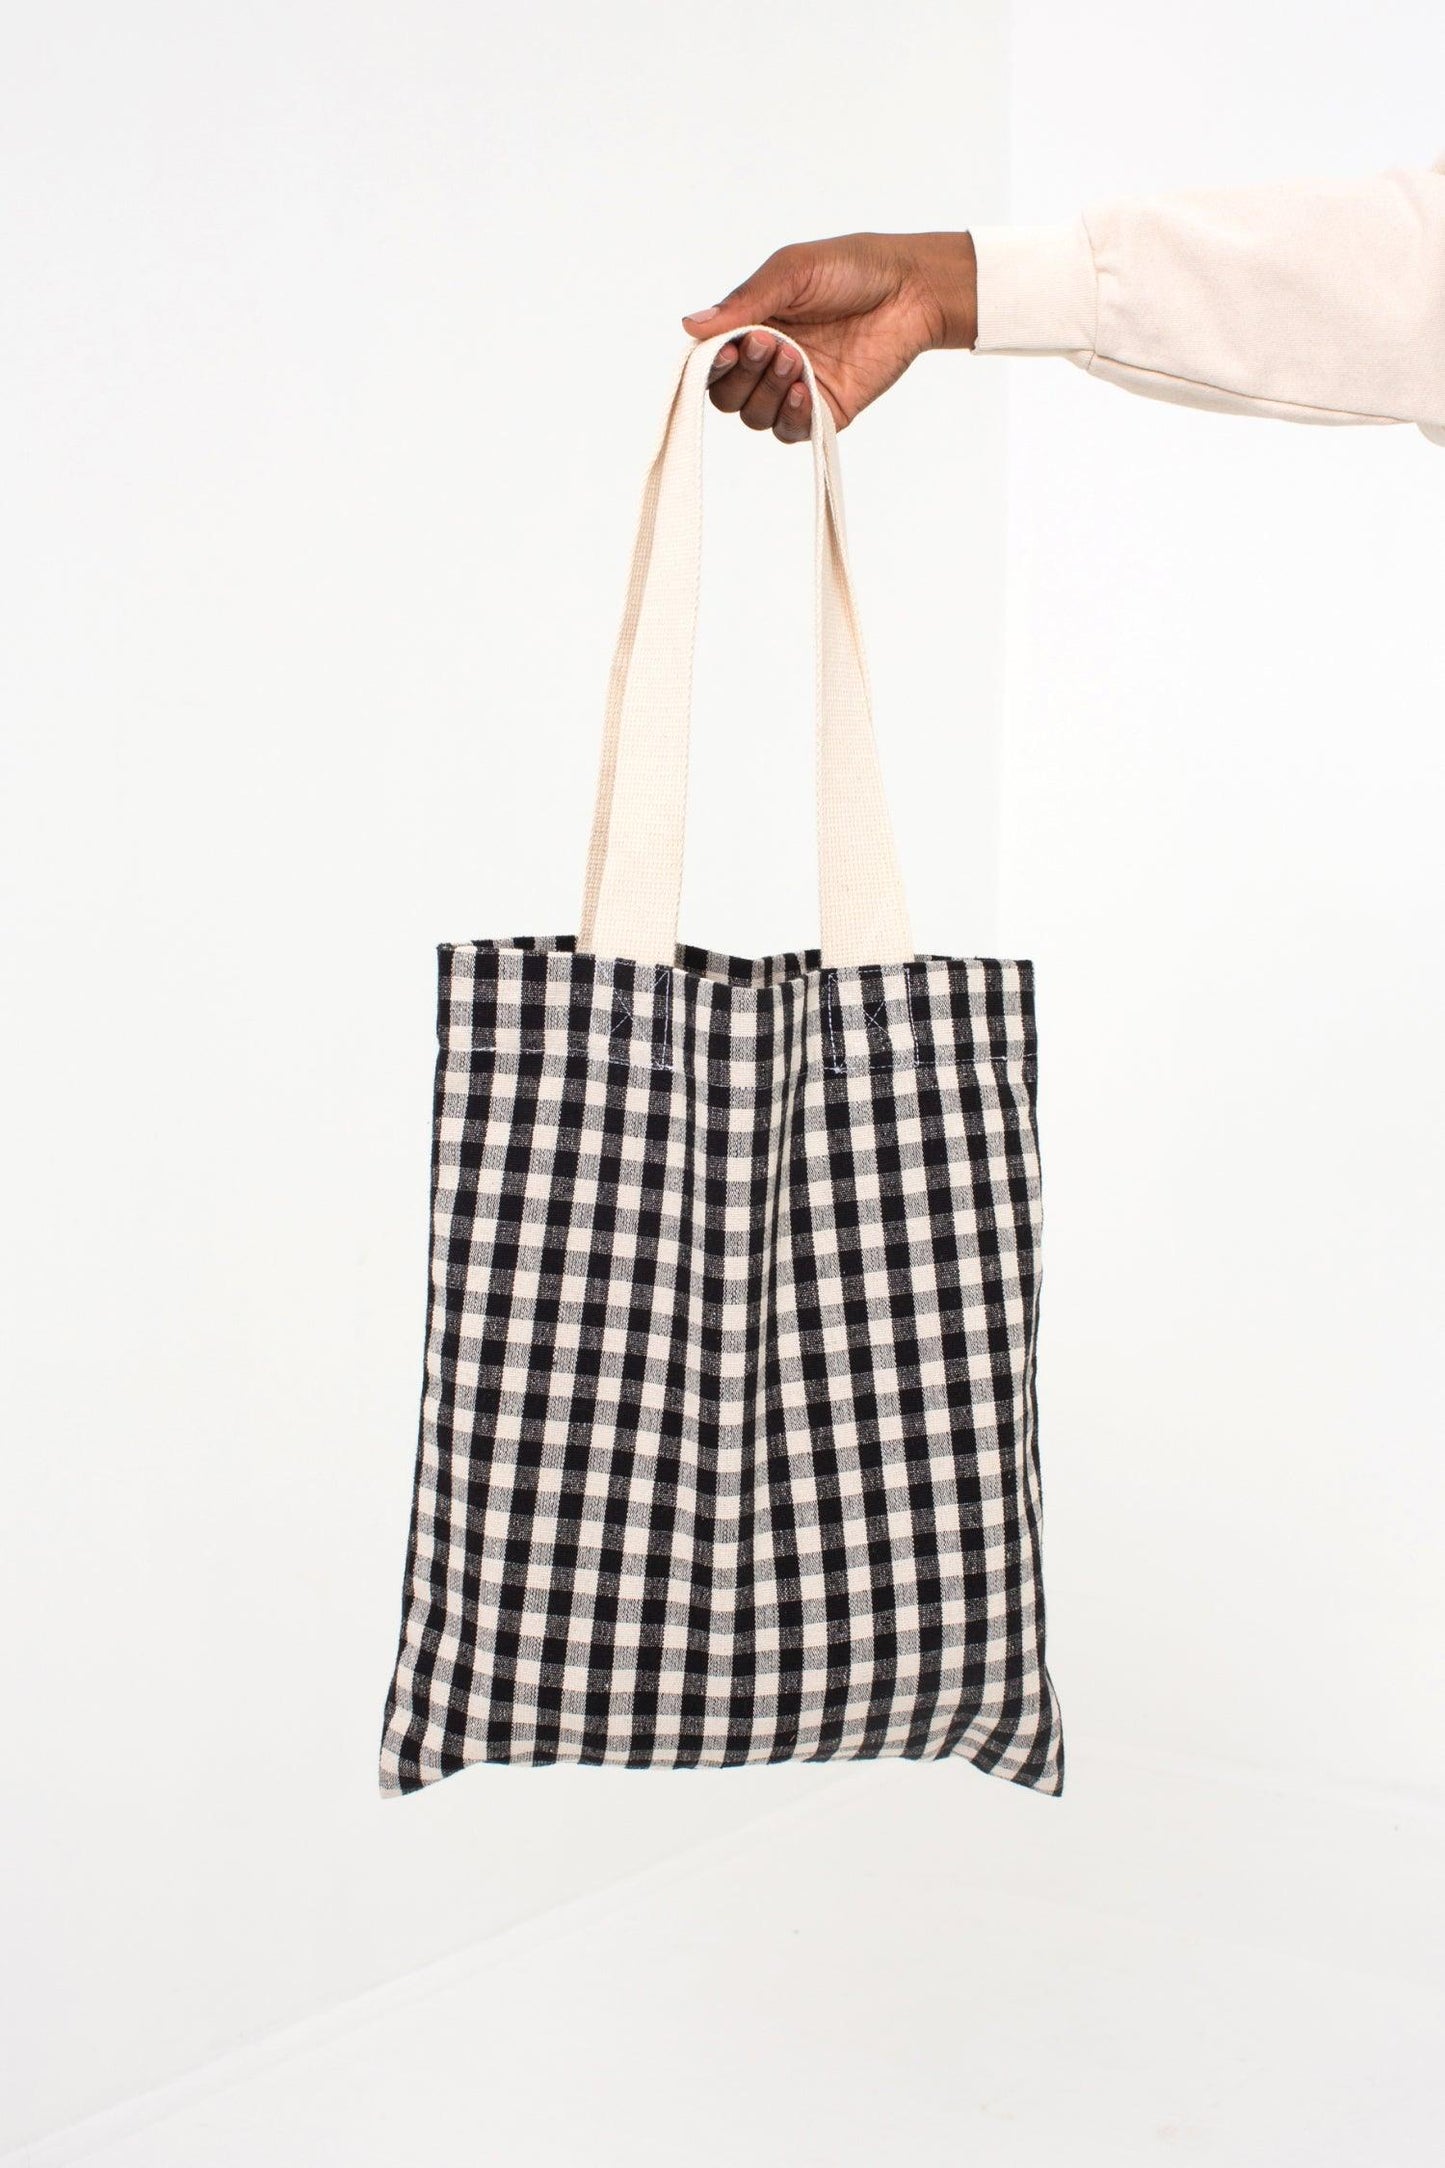 Classic Closed-Loop Tote - Everybody.World